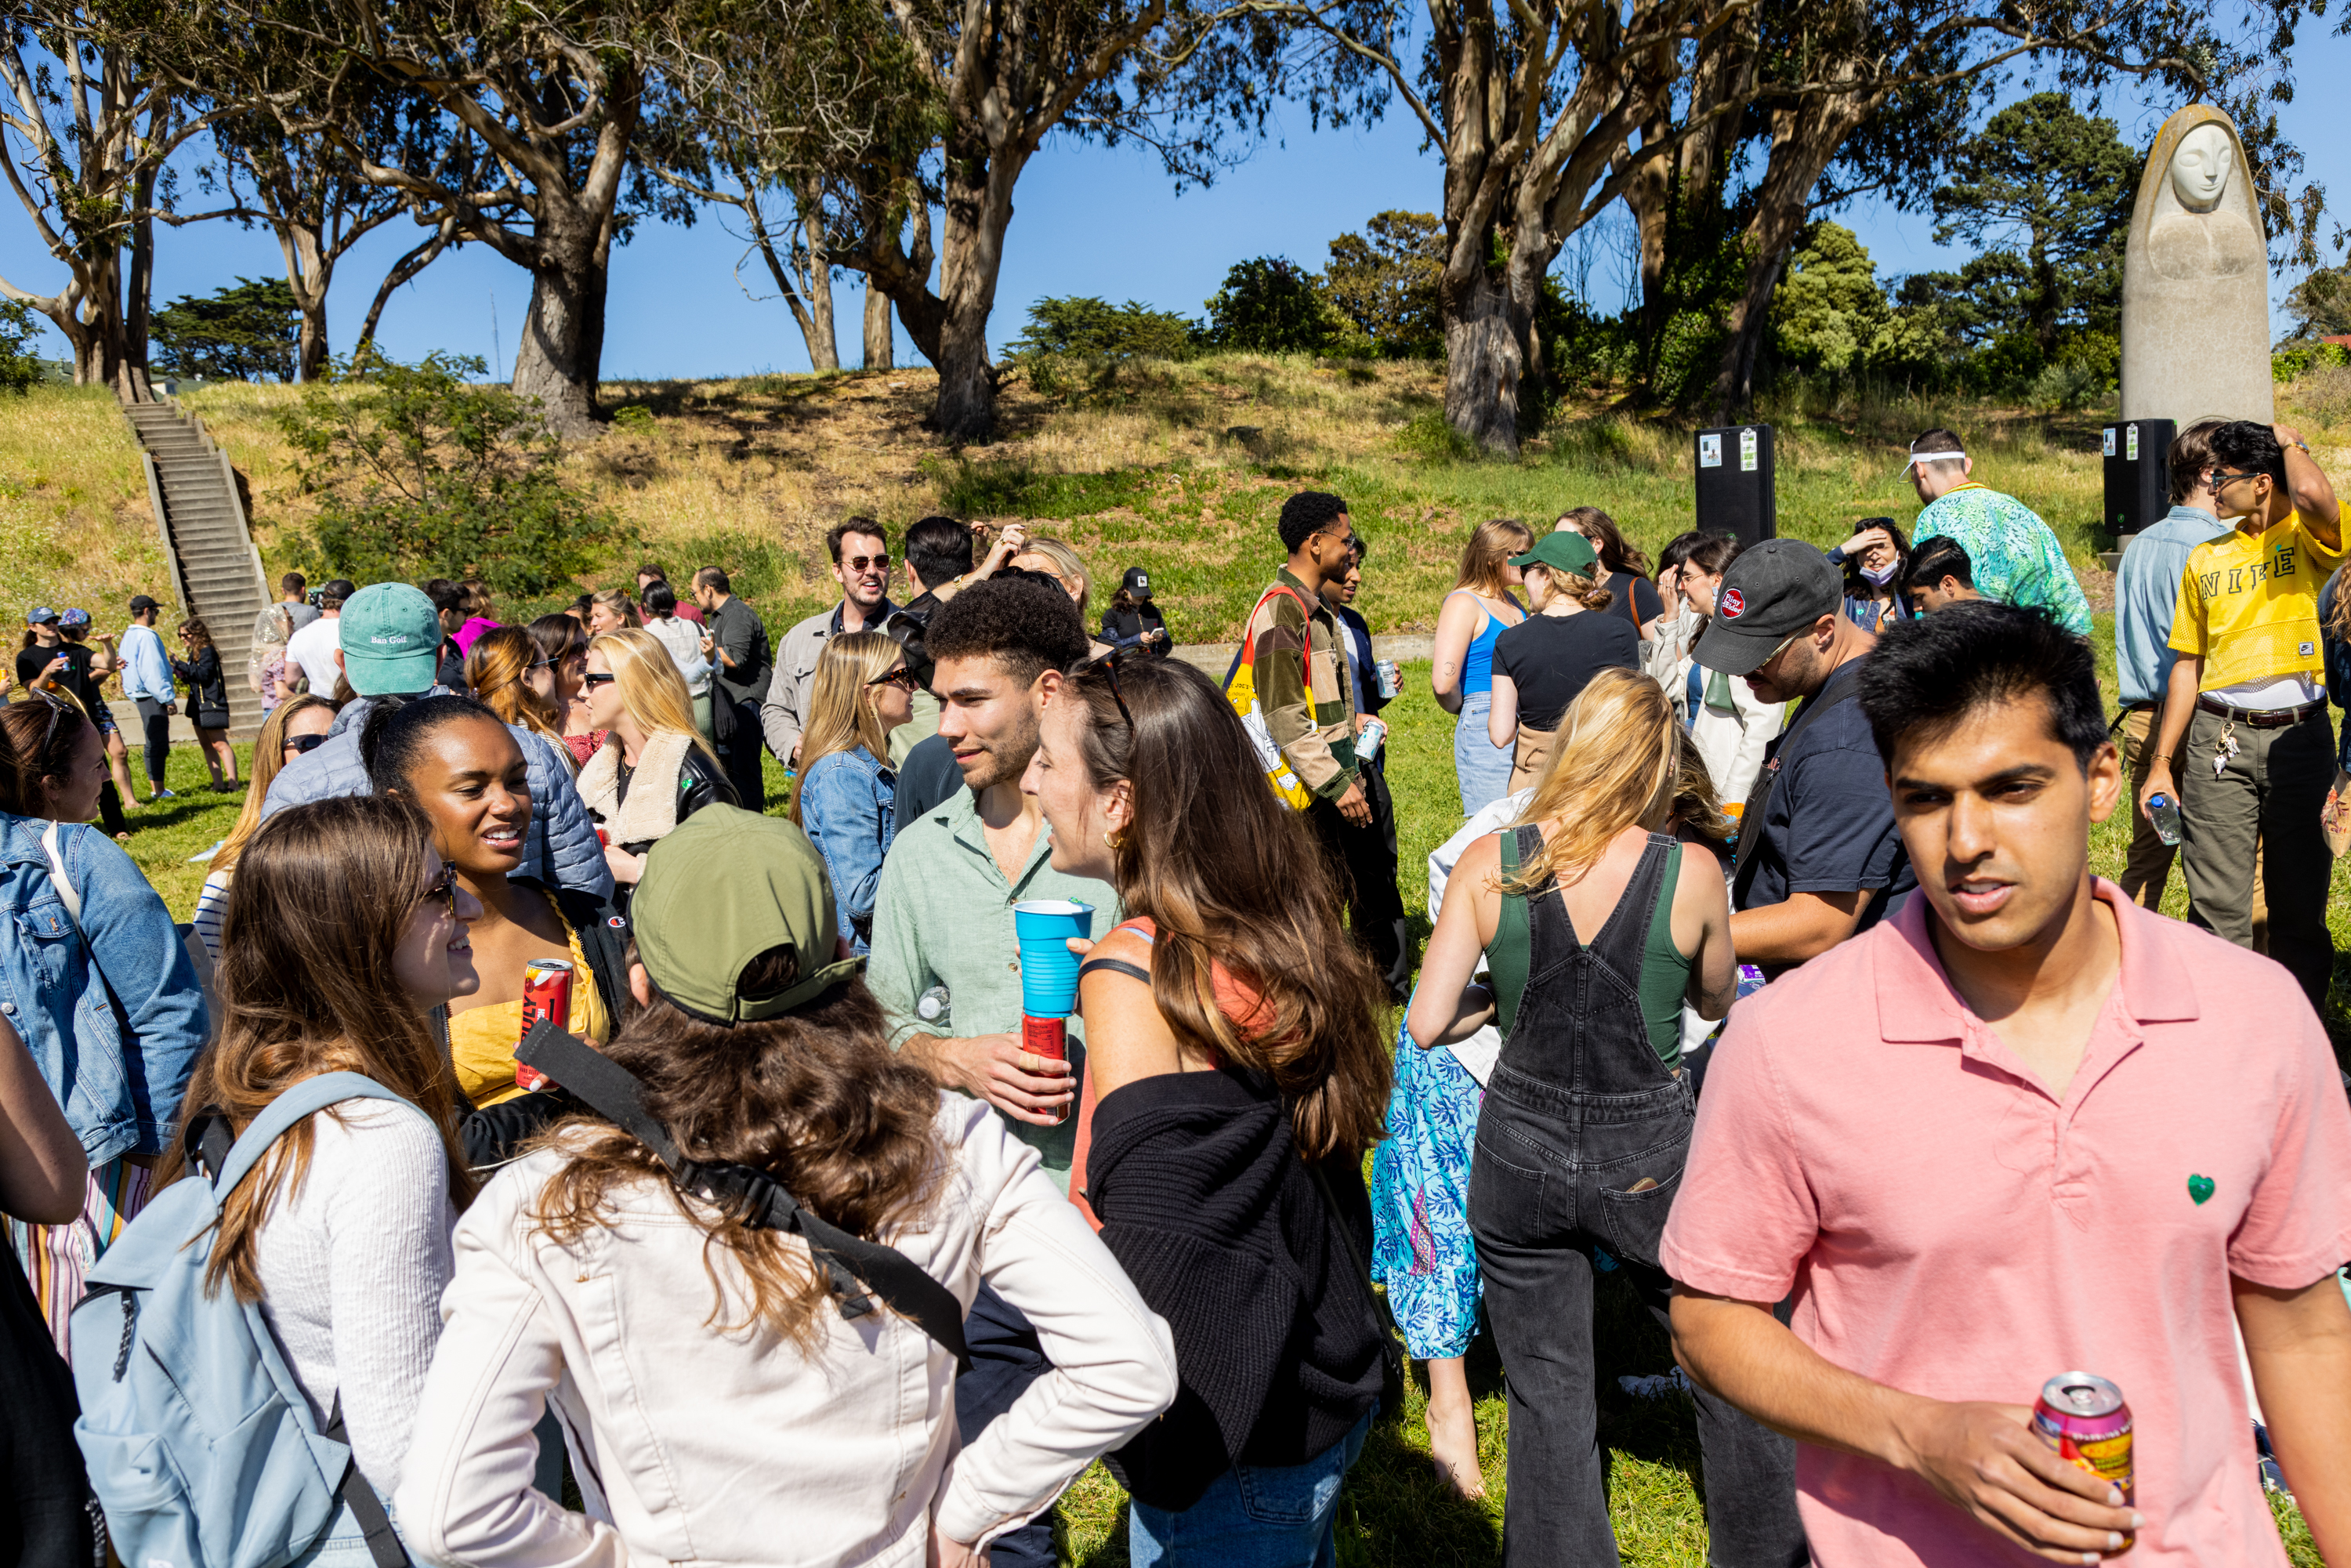 A diverse crowd of people gathered in a grassy area socialize and enjoy a sunny day outdoors. Some hold drinks.